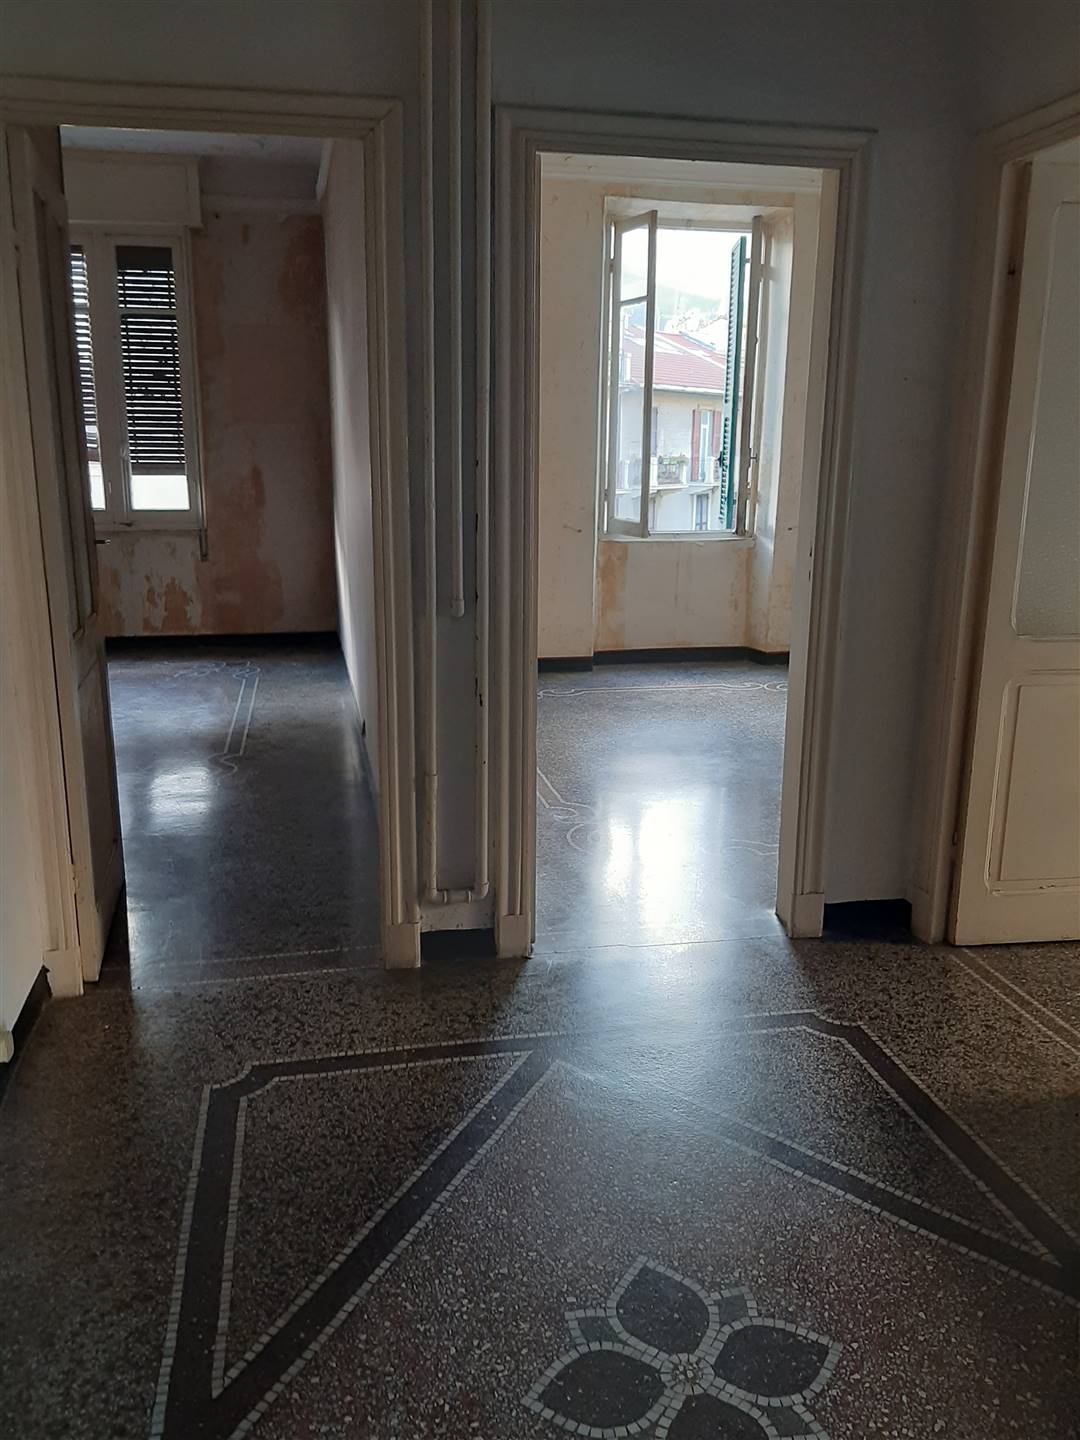 VILLAPIANA, SAVONA, Apartment for sale of 100 Sq. mt., Be restored, Heating Individual heating system, Energetic class: G, placed at 4° on 5, 